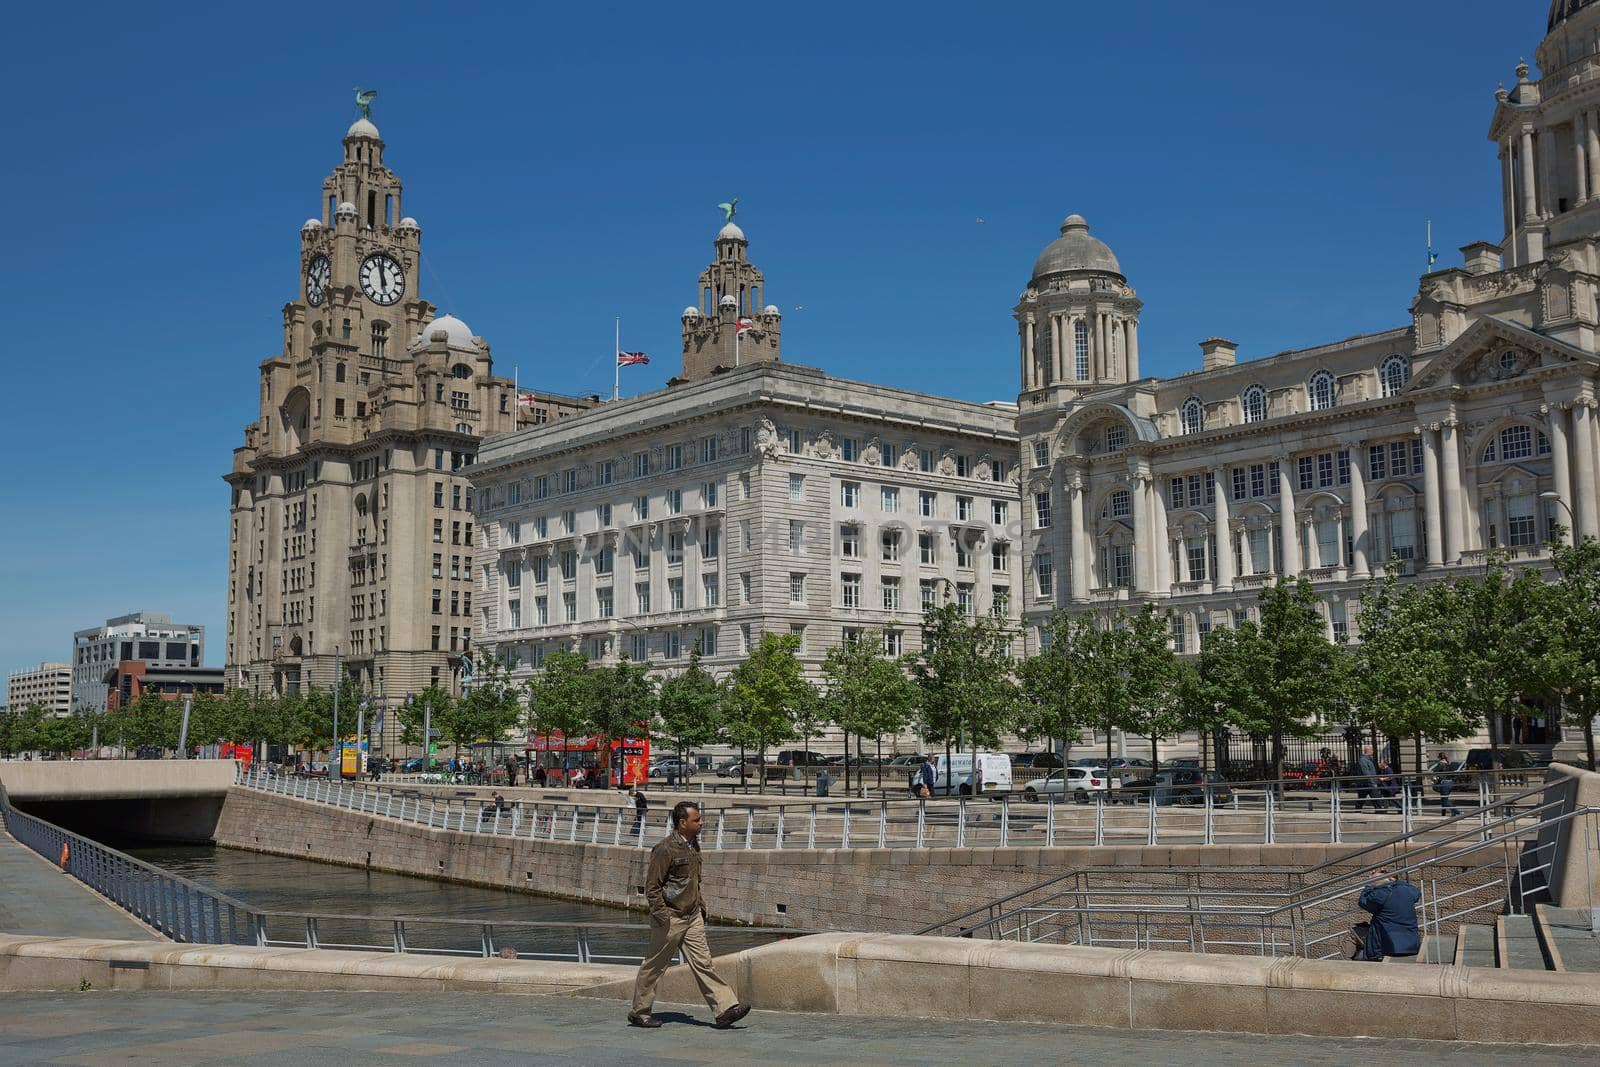 Port of Liverpool Building (or Dock Office) in Pier Head, along the Liverpool's waterfront, England, United Kingdom by wondry